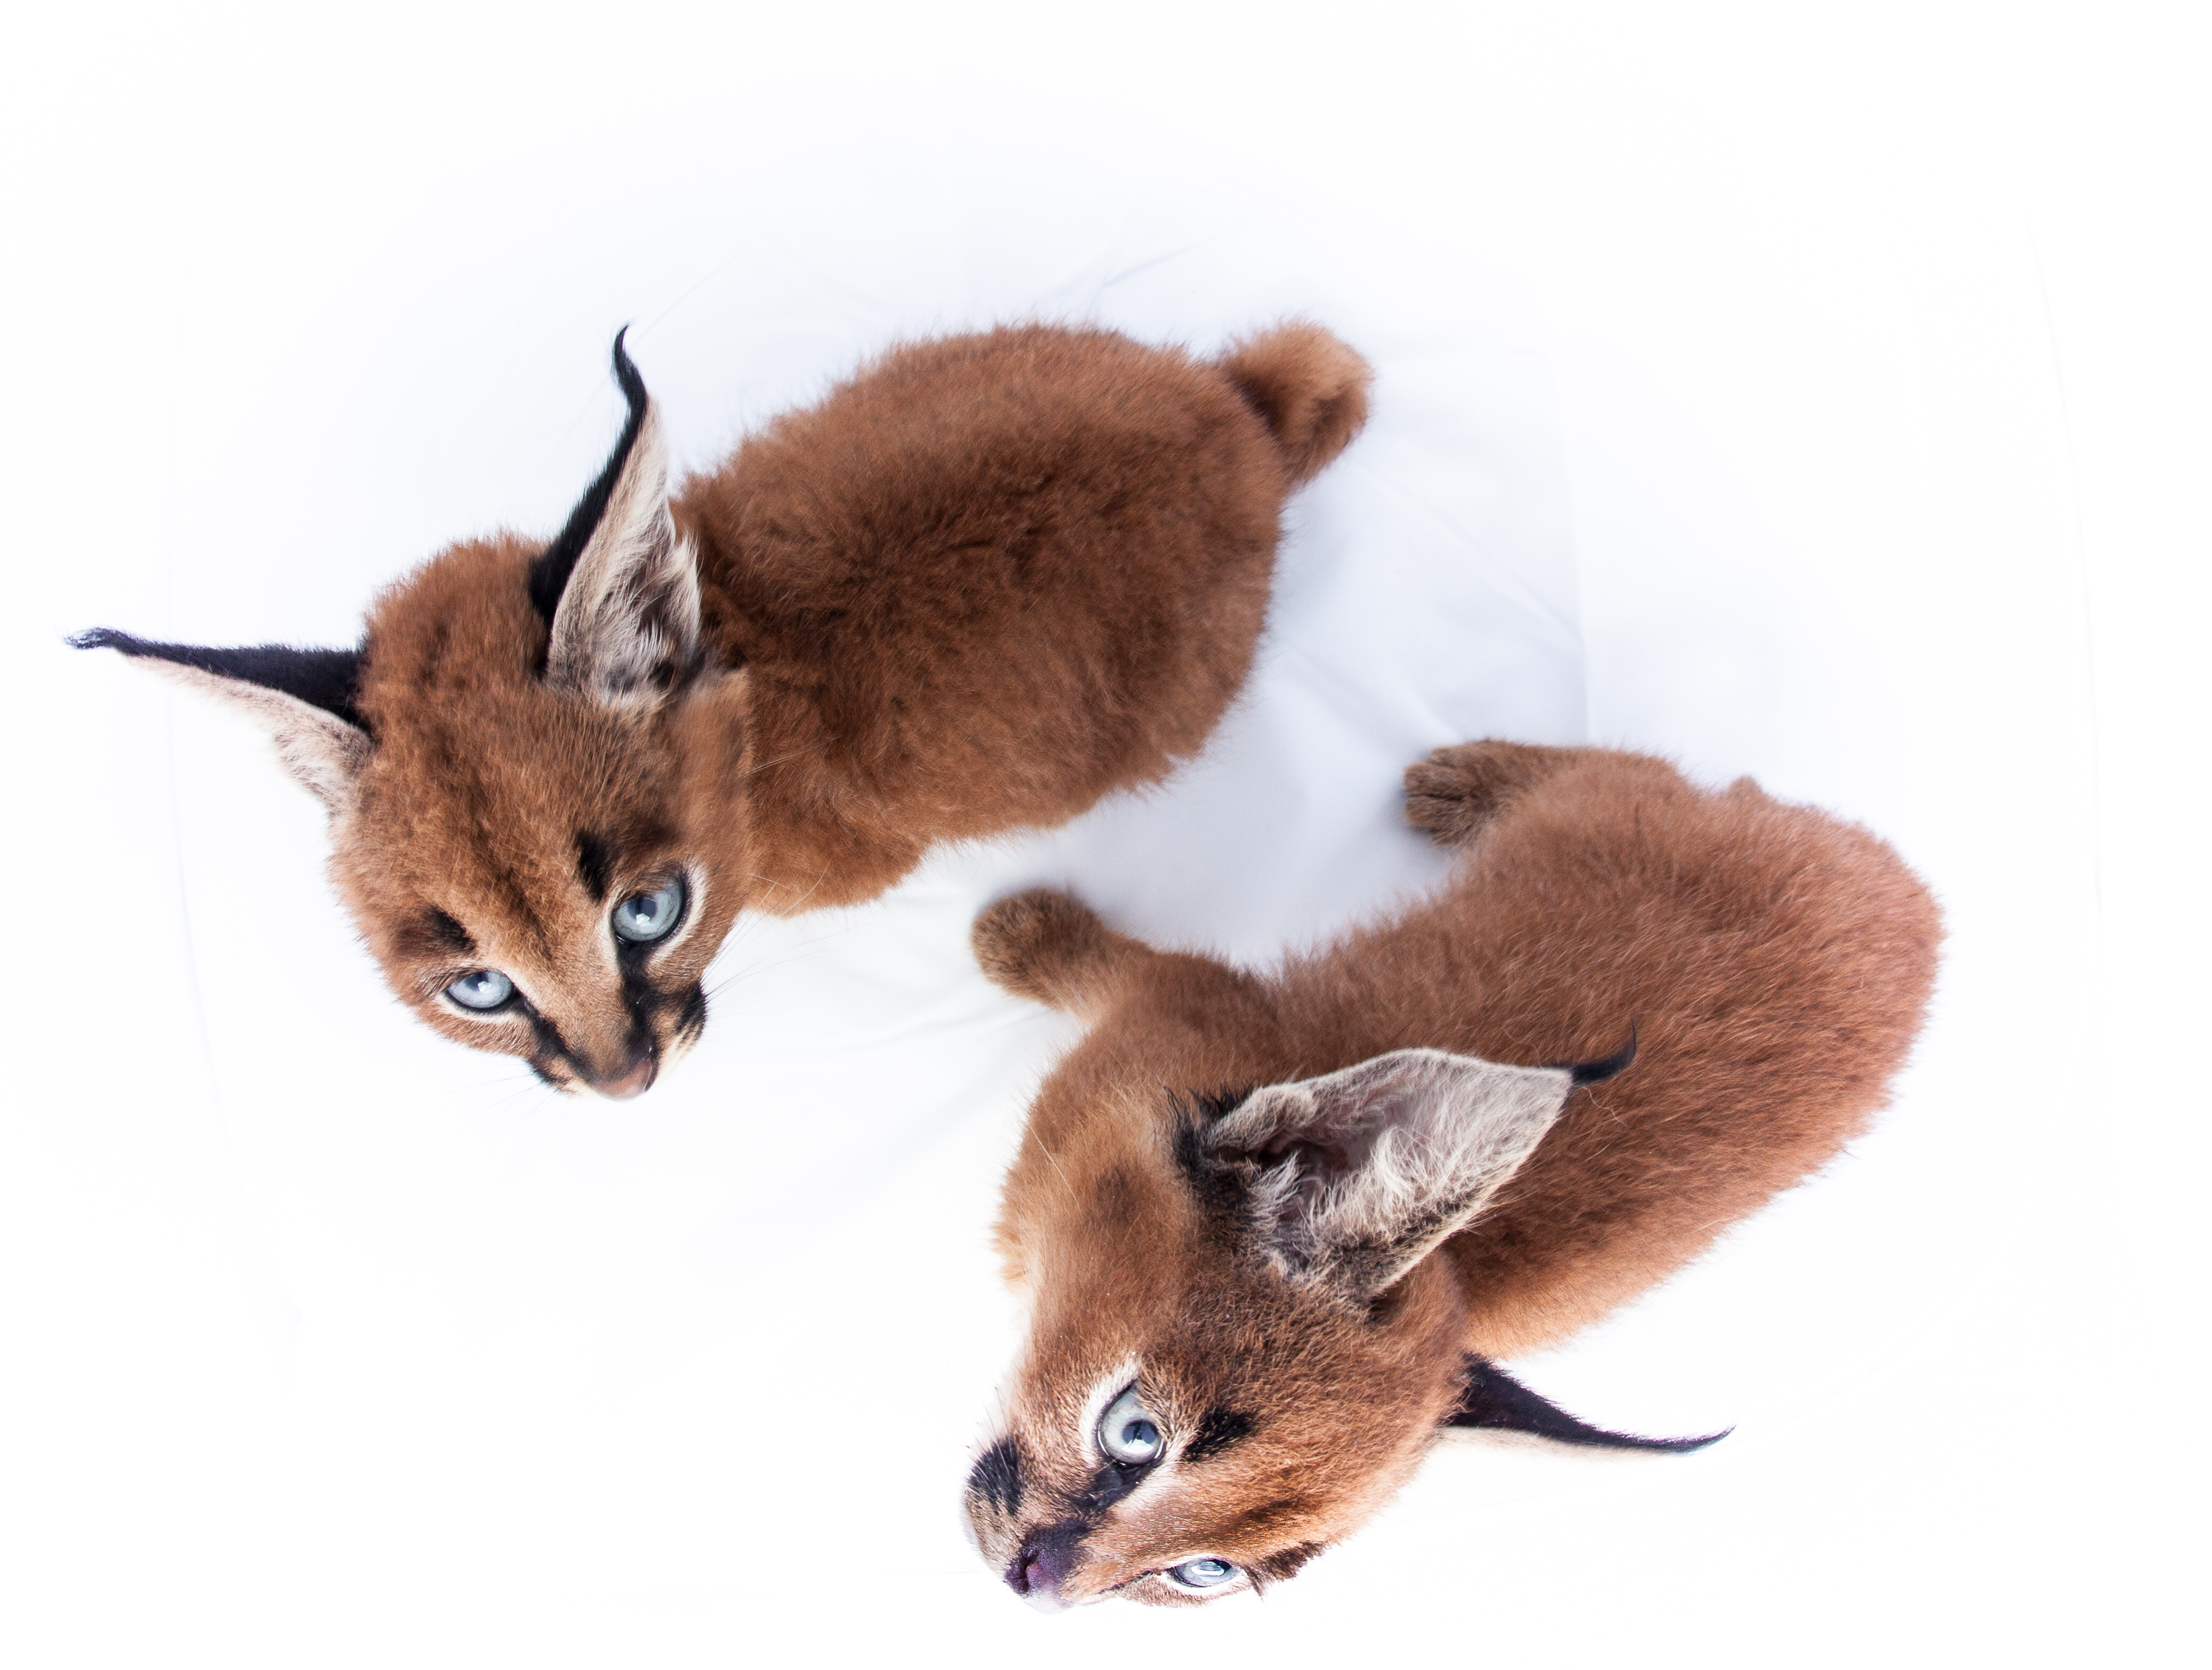 What are caracal kittens?